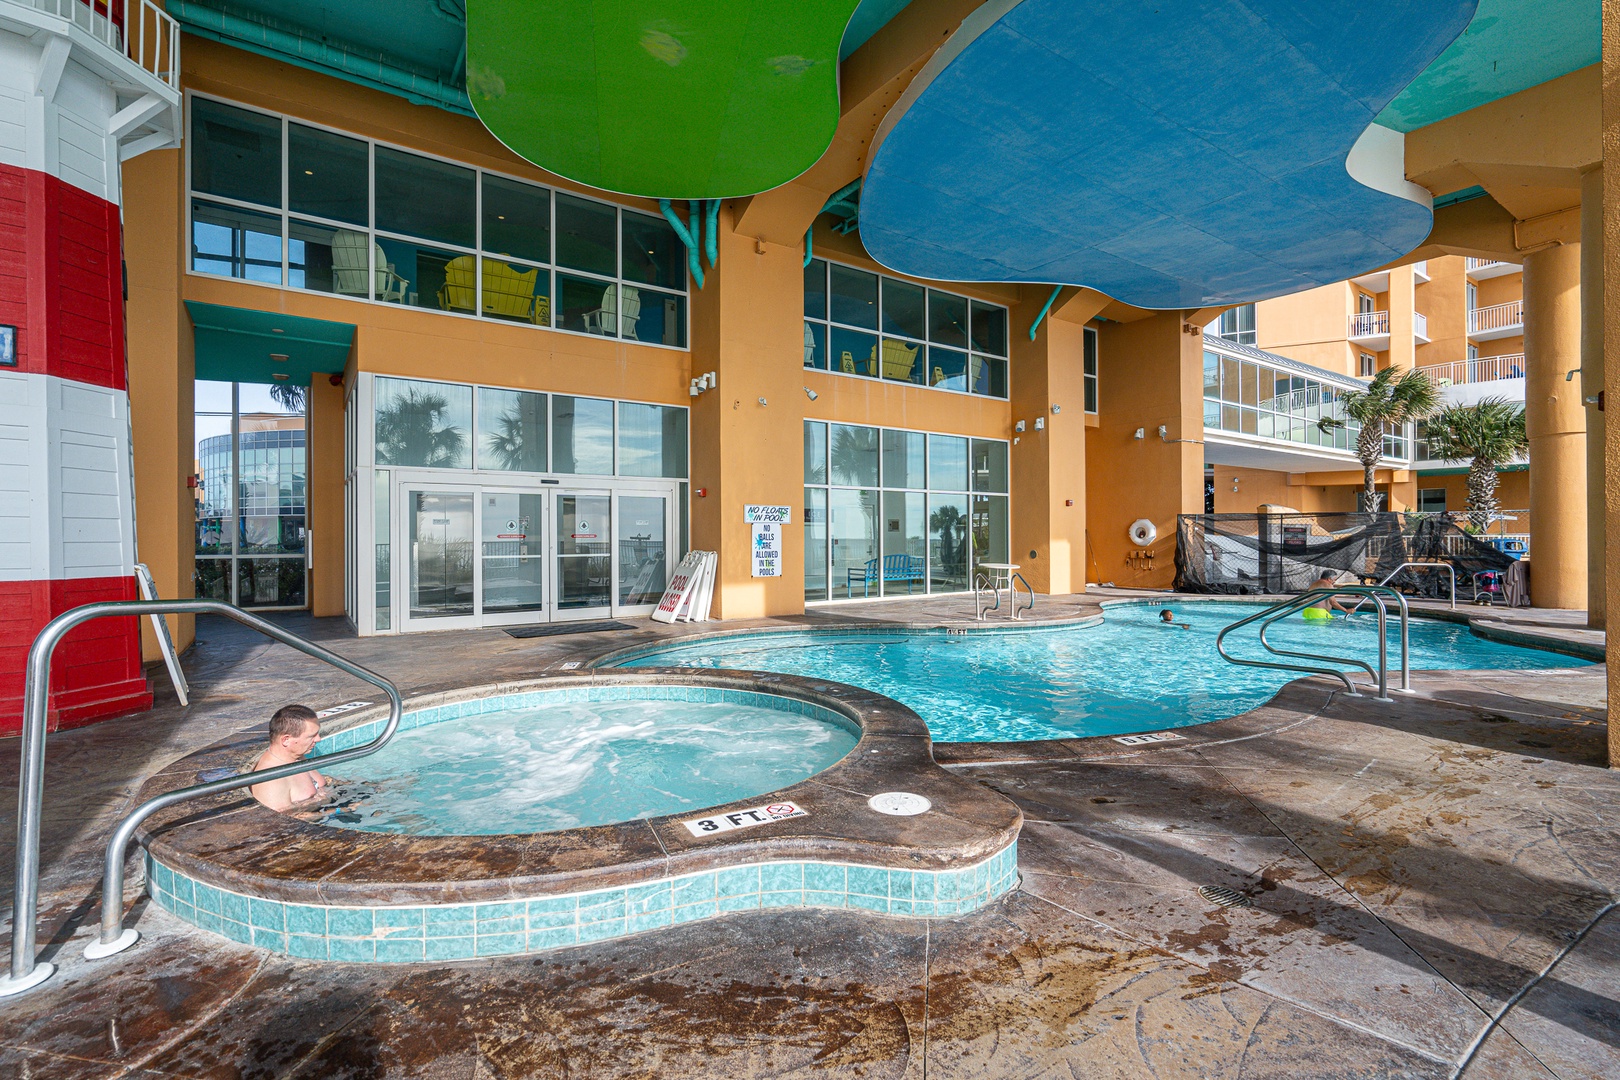 Enjoy all the fabulous amenities this resort community has to offer